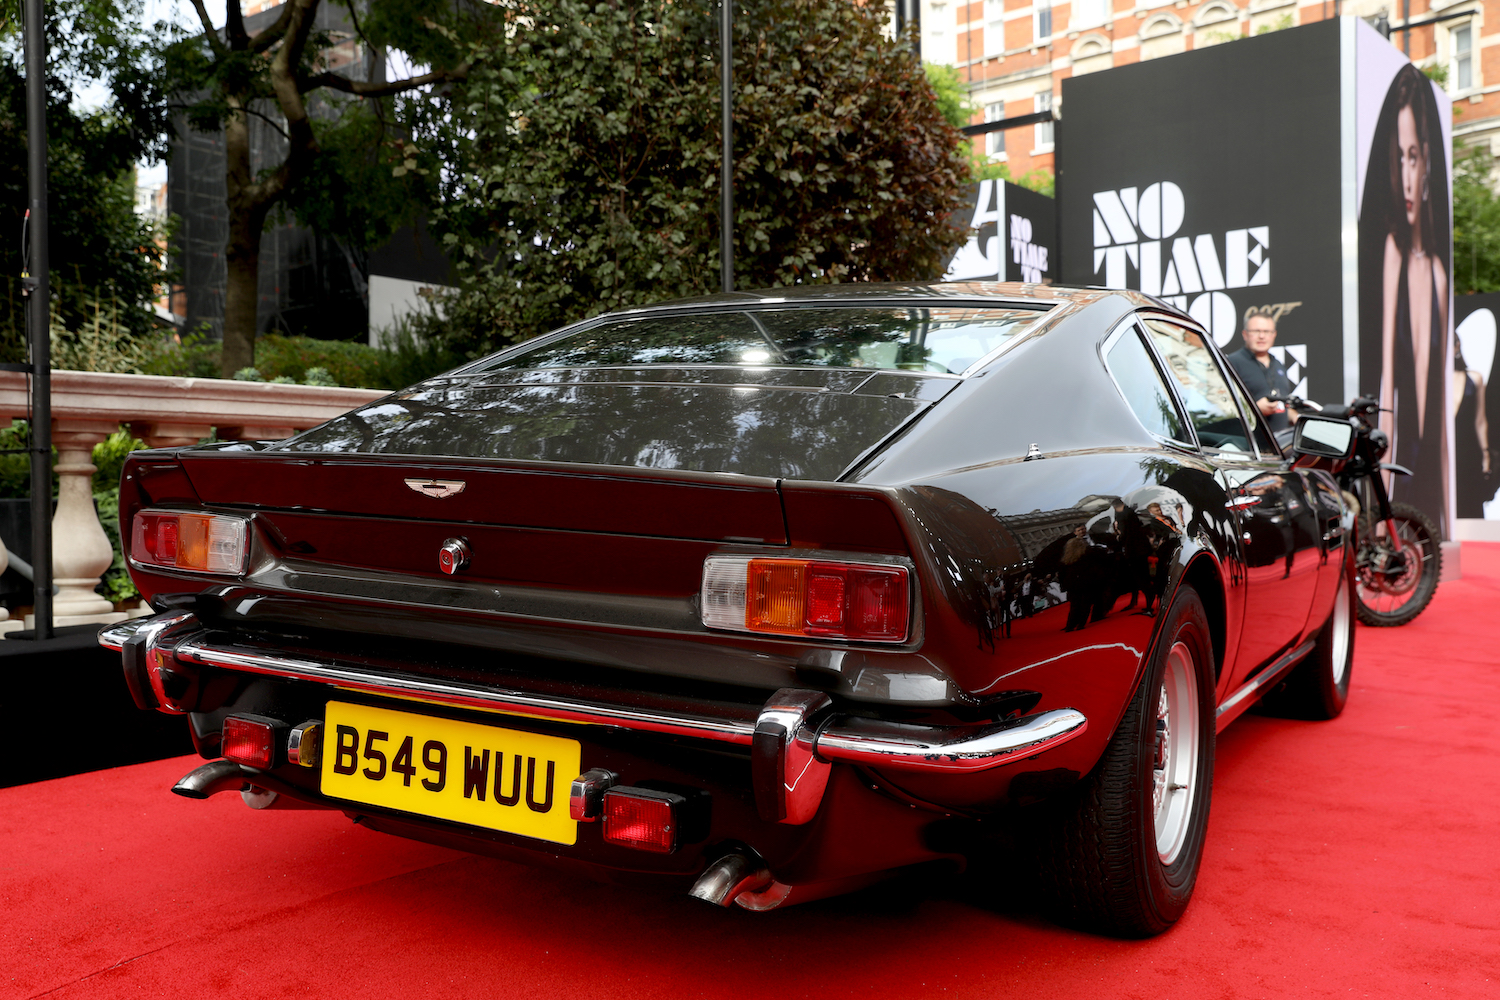 1987 Aston Martin V8 Vantage Volante prop car at the world premier of the new 007 film. James Bond’s ‘New’ 1980s Aston Martin V8 from ‘No Time To Die’ | Tristan Fewings/Getty Images for EON Productions, Metro-Goldwyn-Mayer Studios, and Universal Pictures